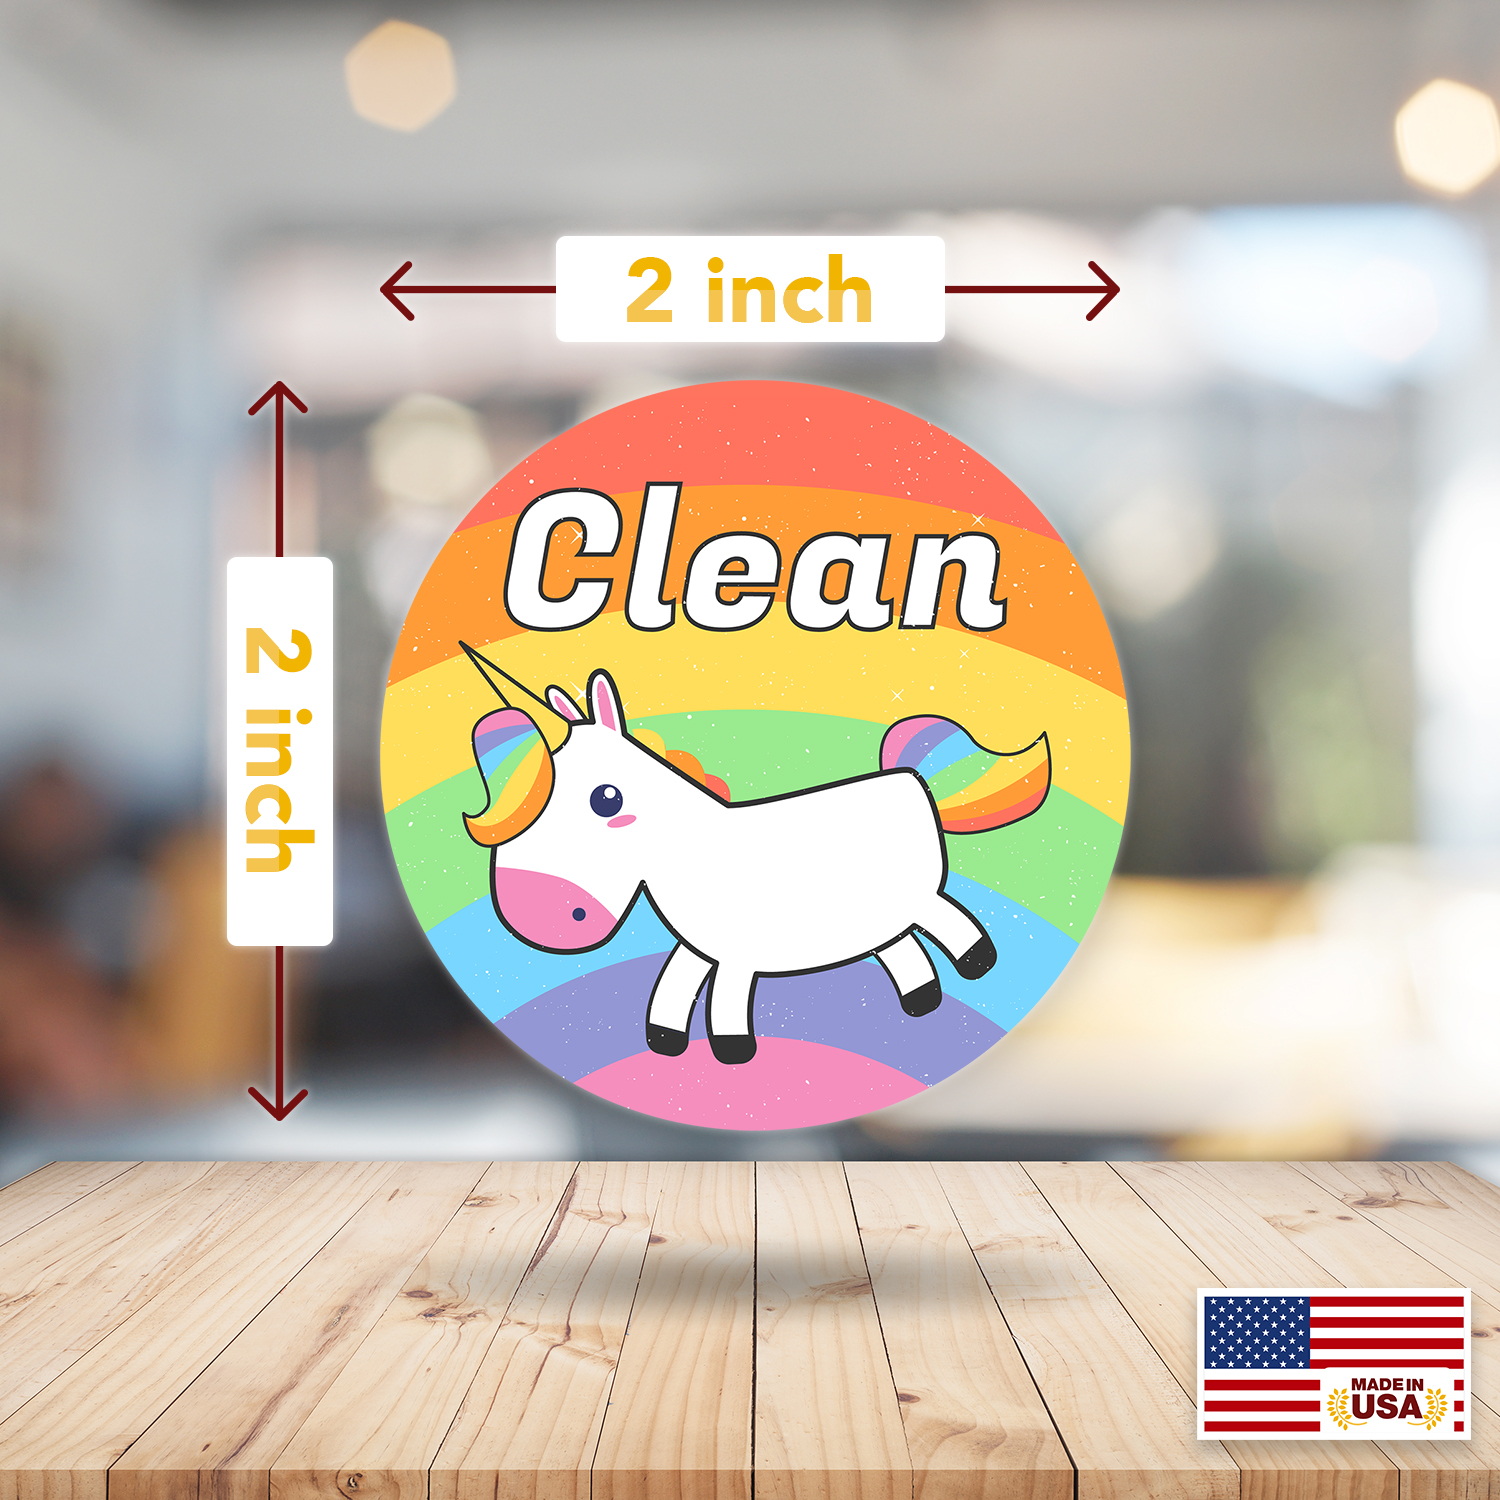 Large Dishwasher Magnet Clean Dirty Sign - Funny Design Magnets - Large, Strong, Cool Magnetic Gadgets for Kitchen Organization and Storage - Strong